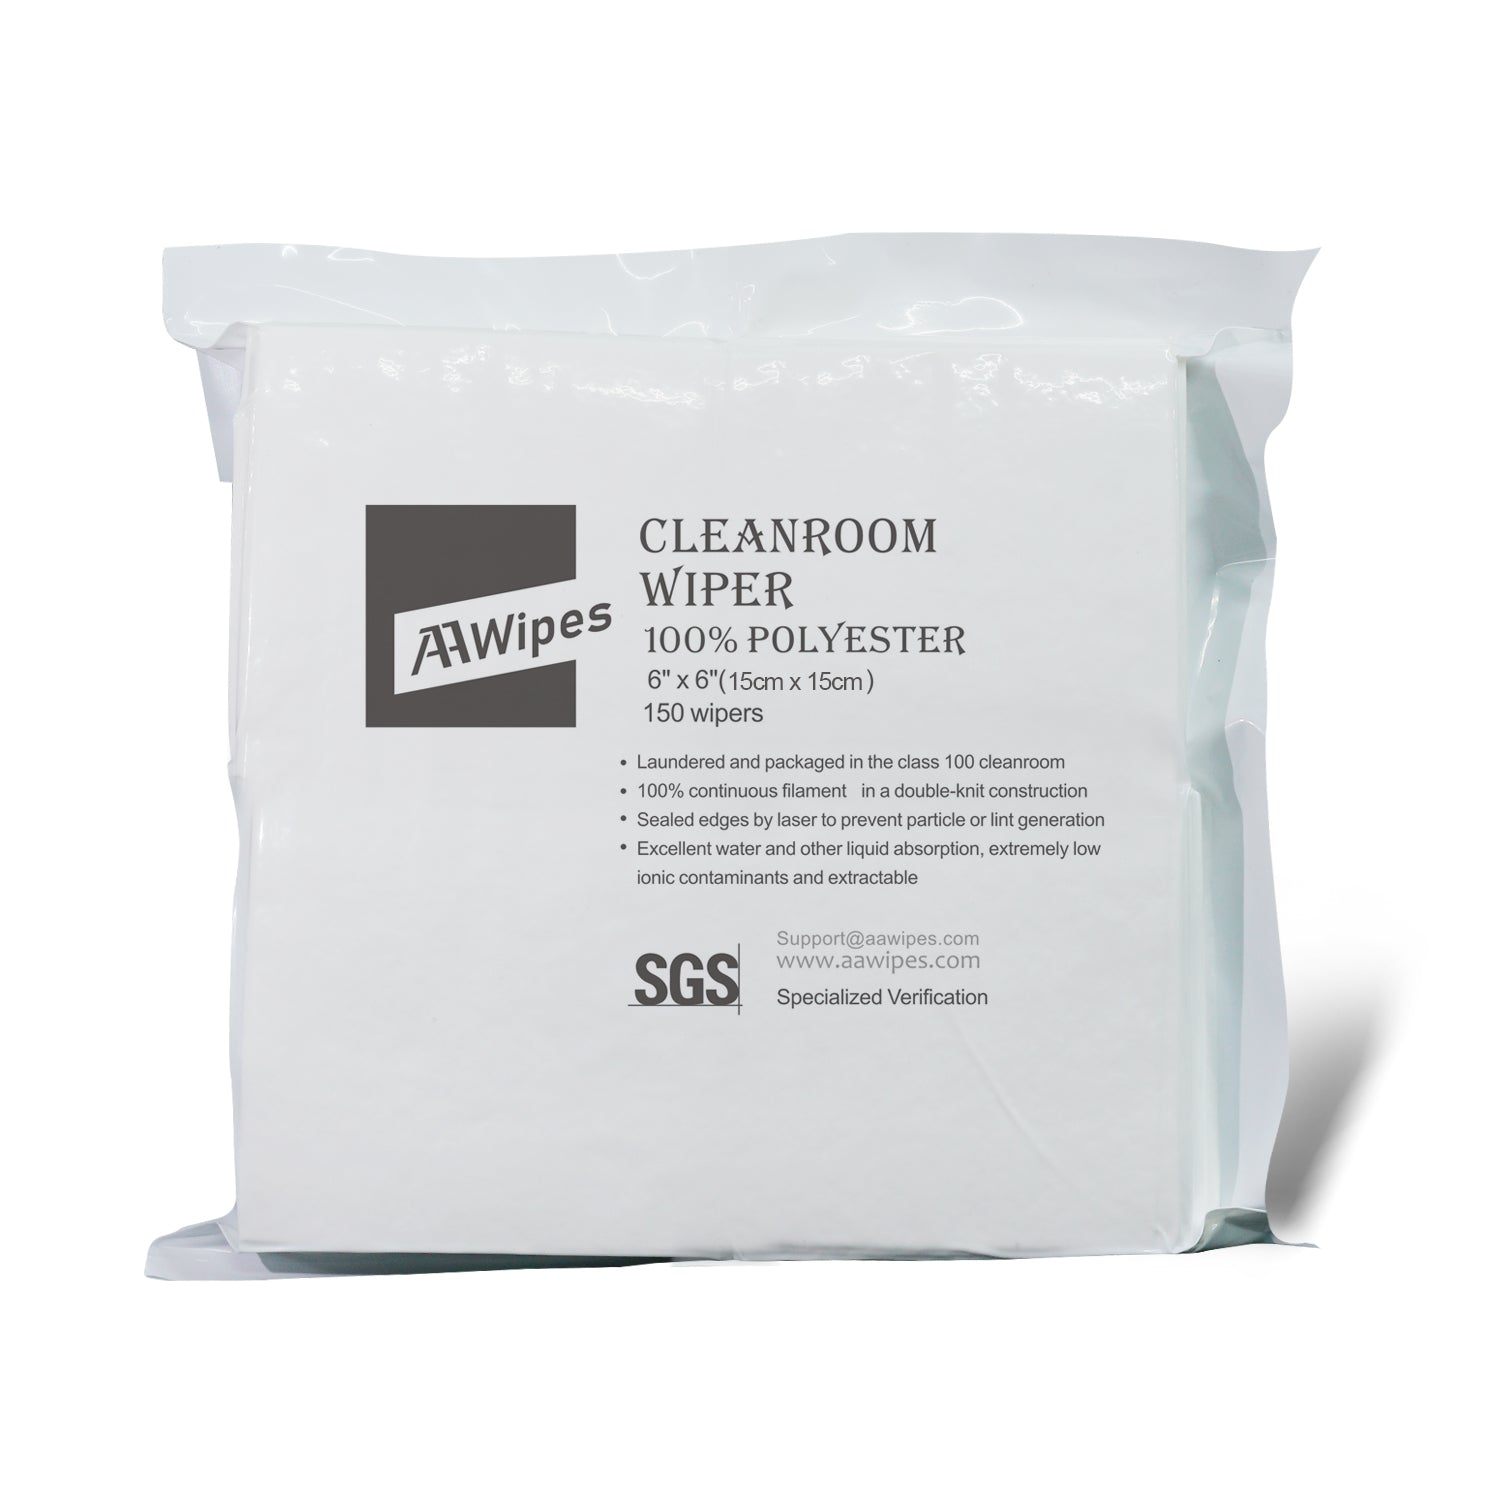 Biotech Lab Cleanroom Wipes 6"x6" Double Knit 100% Polyester Wipes Lint Free Cloths with Ultra-fine Filaments, Ideal for Automotive, Manufacturing, and Laboratory Settings. 6,000 wipes/box, 40 bags (No. CP14006).